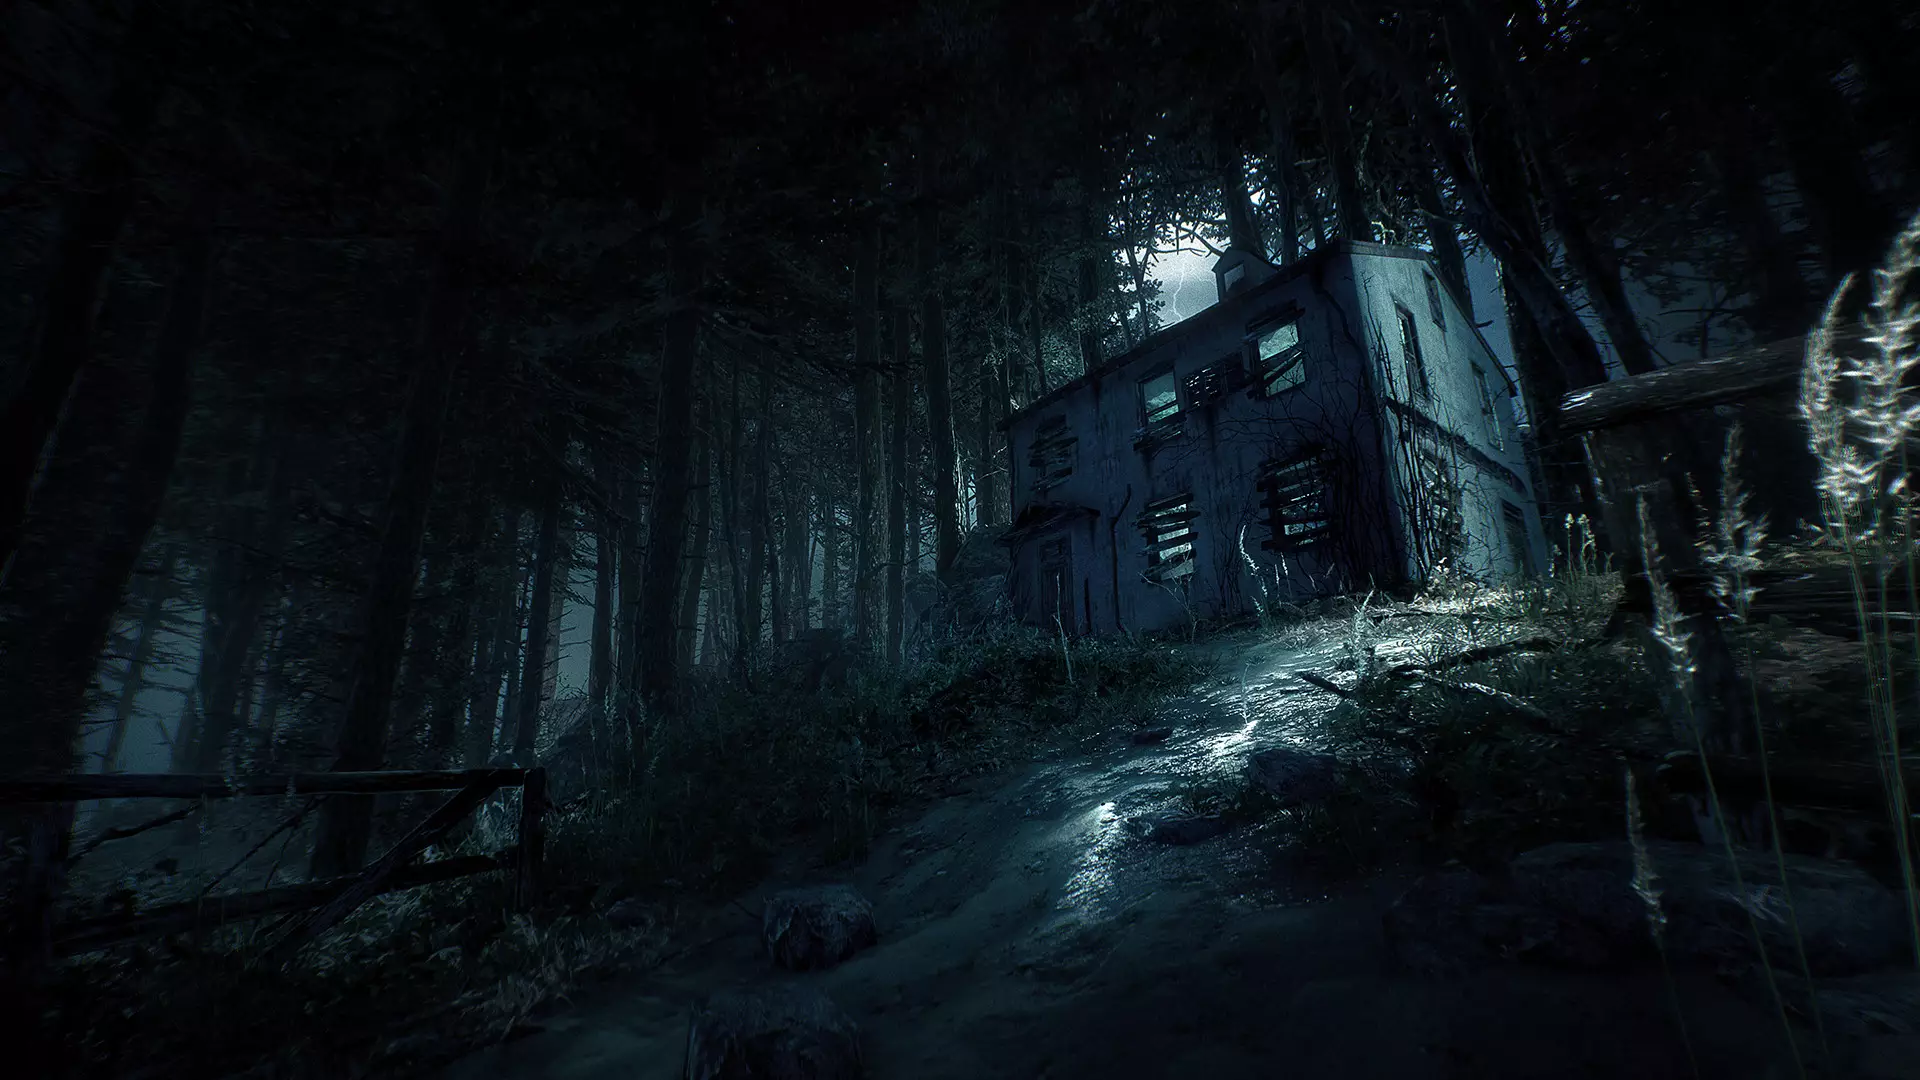 Yeah, this looks like a house I'd willingly explore